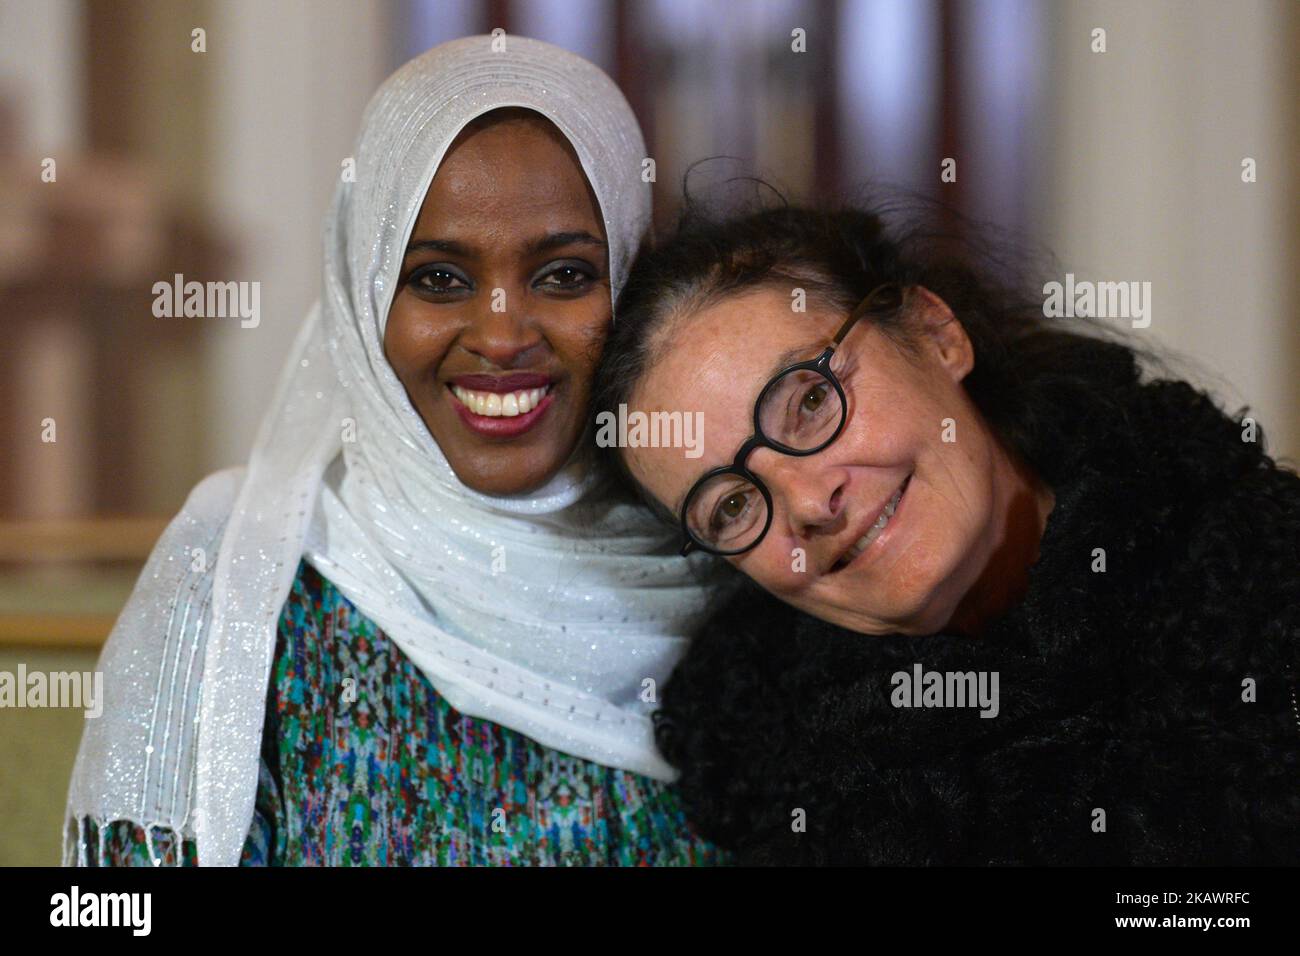 Ifrah Ahmed (Left) with Mary McGuckian, the film Director-Writer-Producer, during an on set photo call, which has just commenced in Dublin for the Pembridge Pictures and Umedia production of ‘A Girl from Mogadishu’ – a true story based on the testimony of Ifrah Ahmed. Born into a refugee camp in war-torn Somalia, Ifrah was trafficked to Ireland as a teenager. Recounting her traumatic childhood experiences of Female Genital Mutilation / Cutting (FGM/C) when applying for refugee status, she was again traumatized and decided to devote her life to the eradication of the practice. Ifrah emerged as Stock Photo